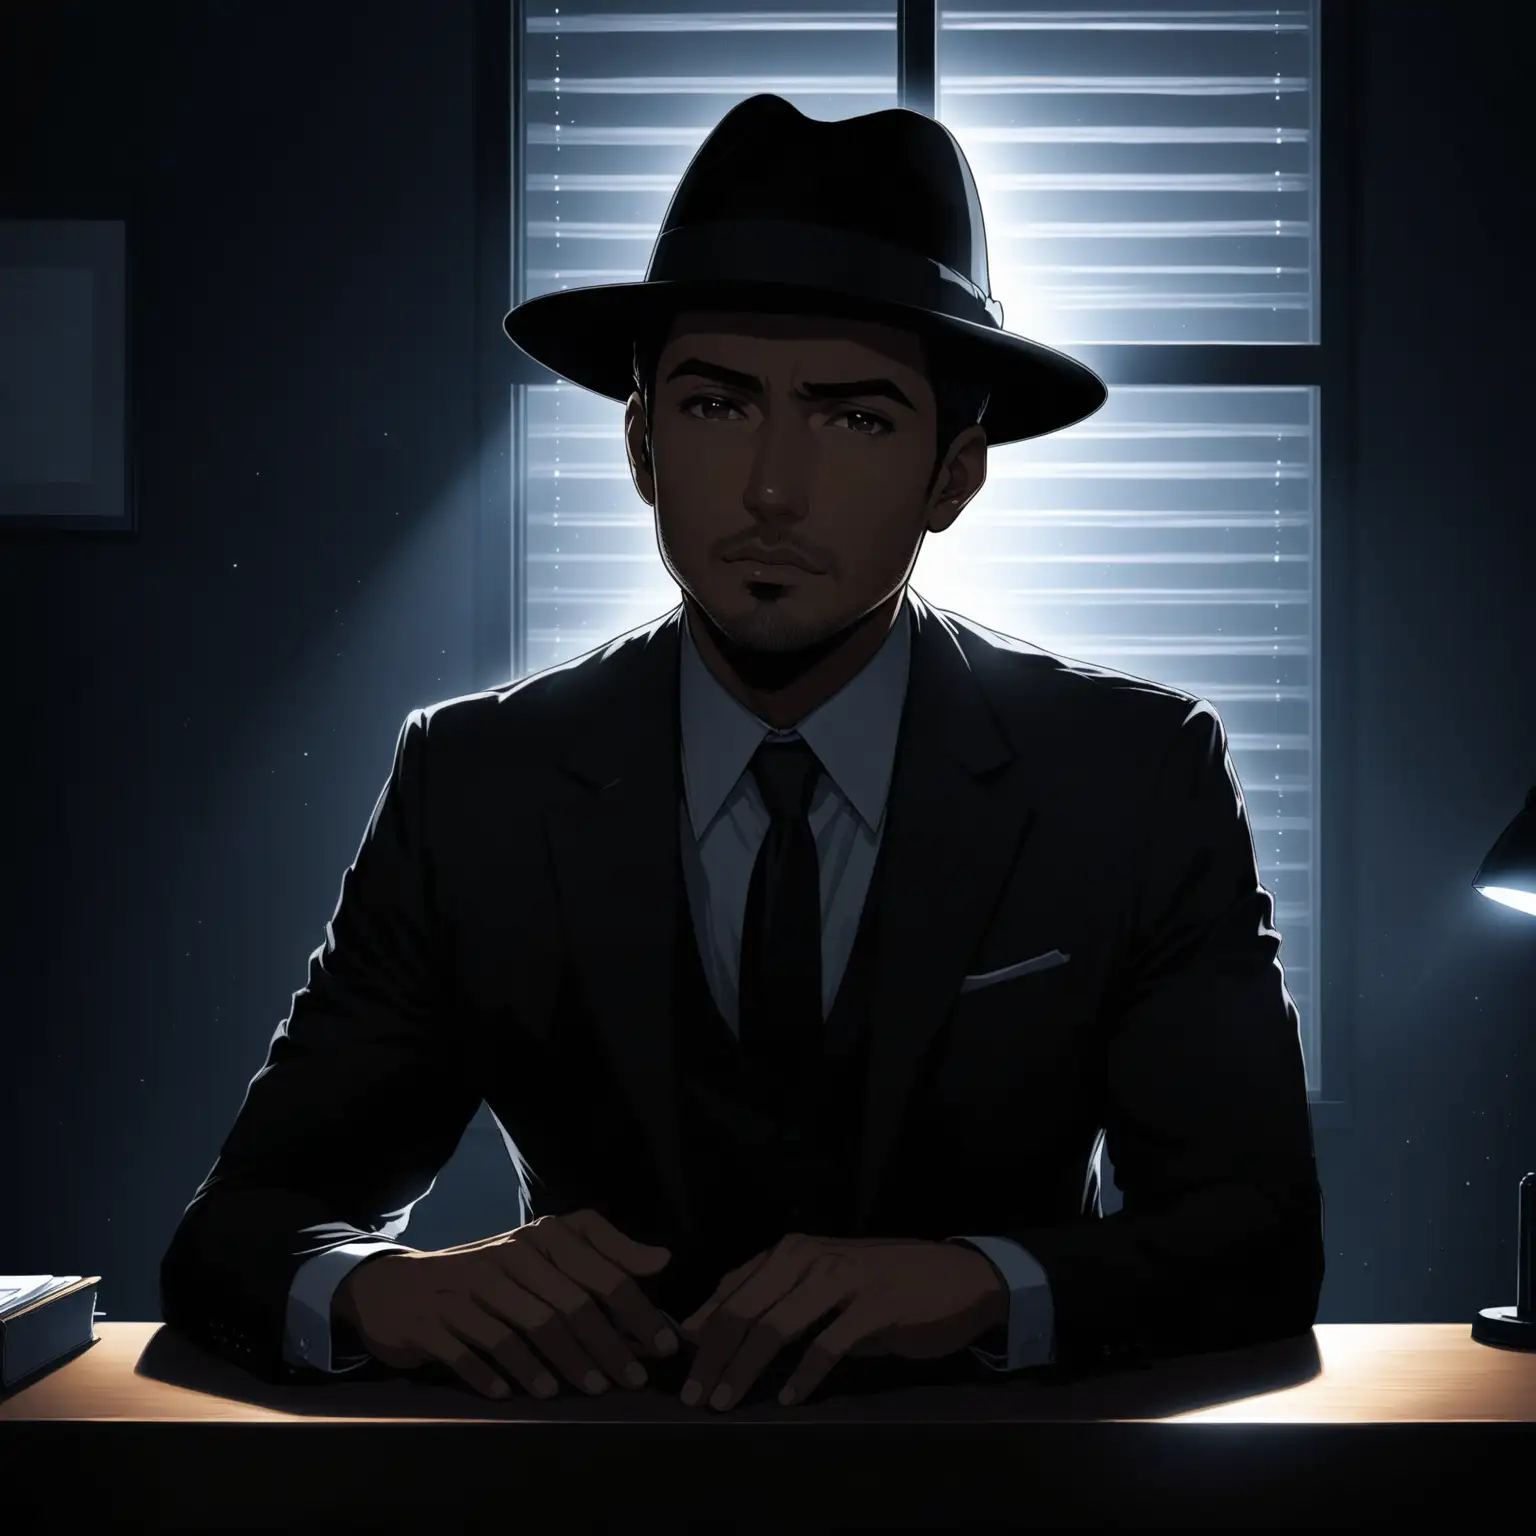 A medium close up on a Latino man in his 30’s sits at his desk in a dark office. It is night. A sheet of light pierces through the window next to him. He wears a black suit and a black fedora hat. Half of his face lit with direct light. His facial expression is inquisitive 